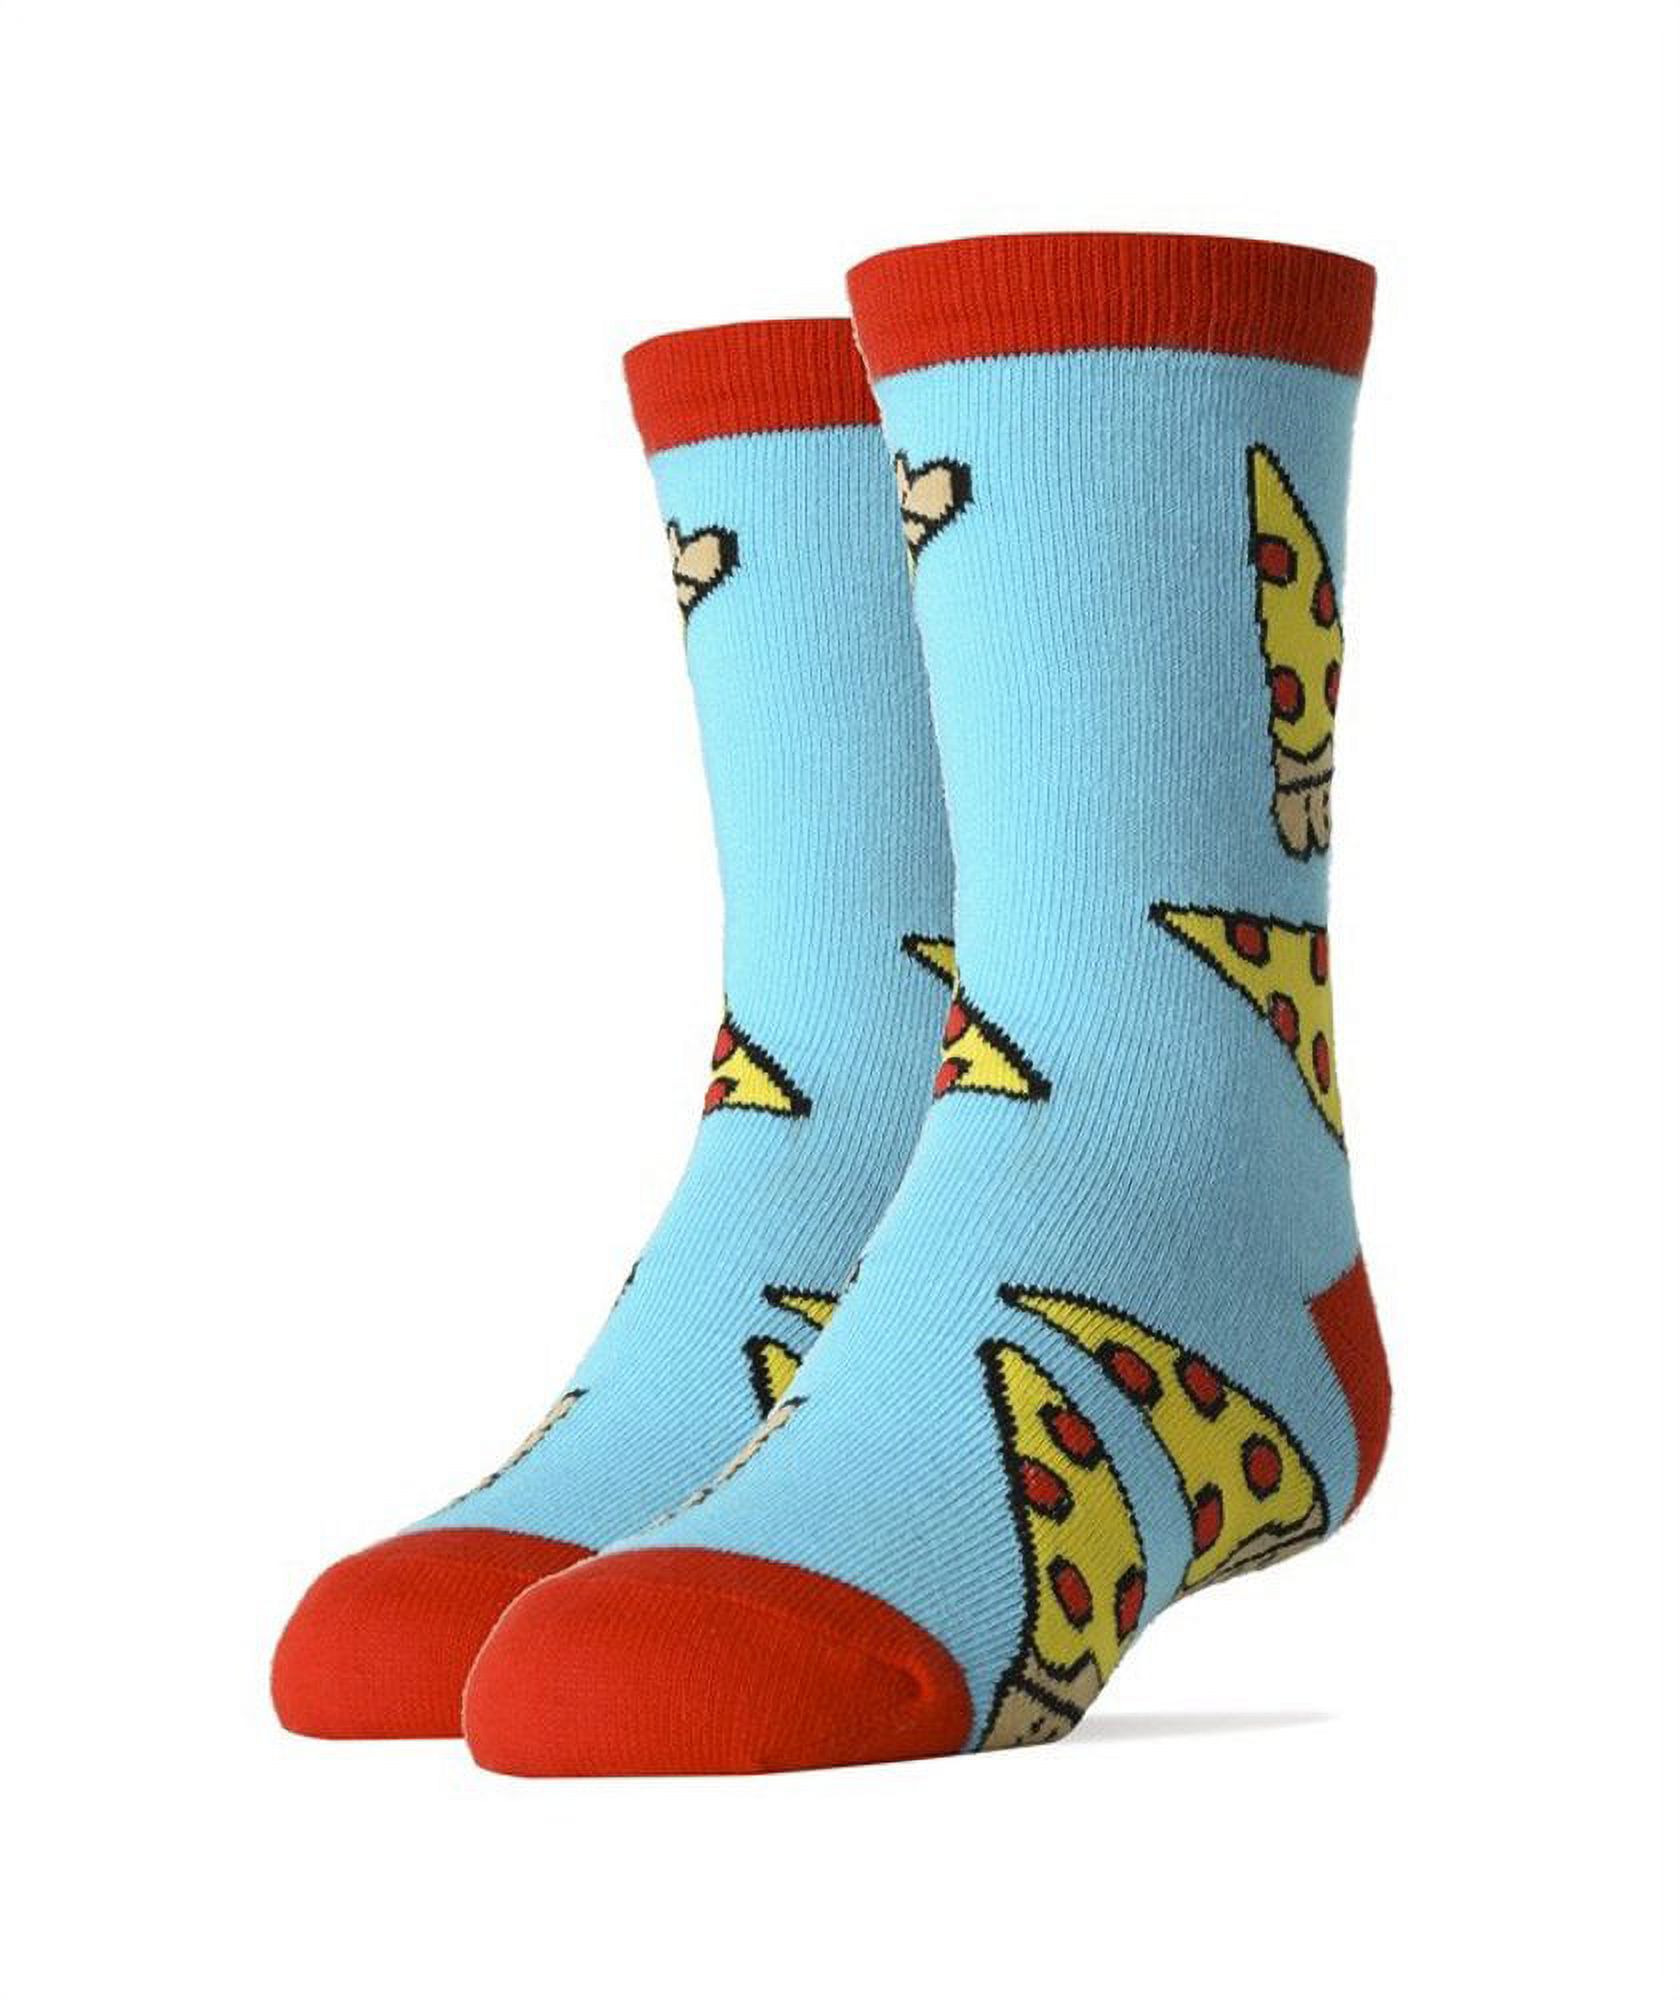 Oooh Yeah! Socks, Mens Cotton Crew Sock (Pizza Party) - image 1 of 3